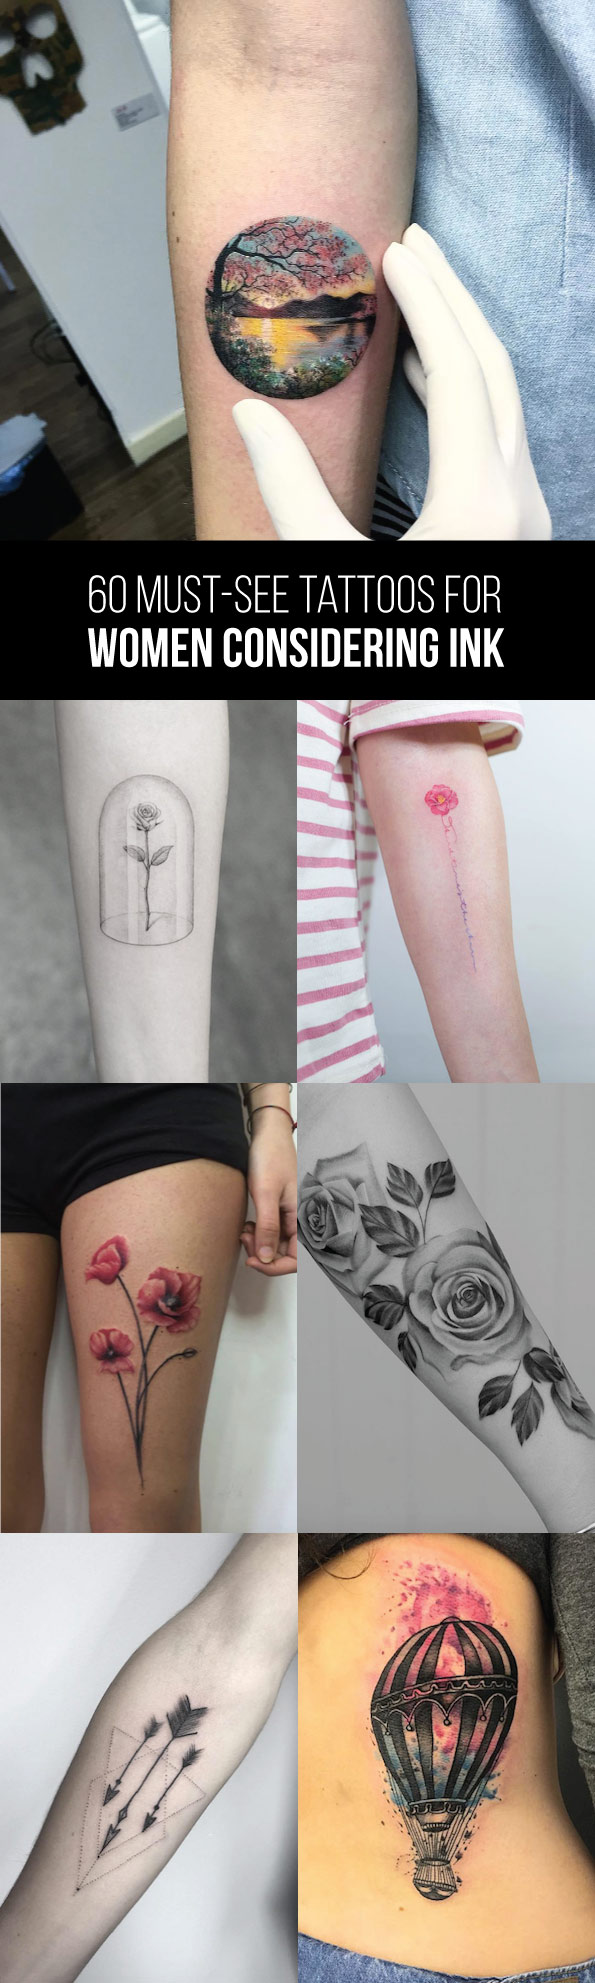 60 Must-See Tattoos for Women Considering Ink | TattooBlend